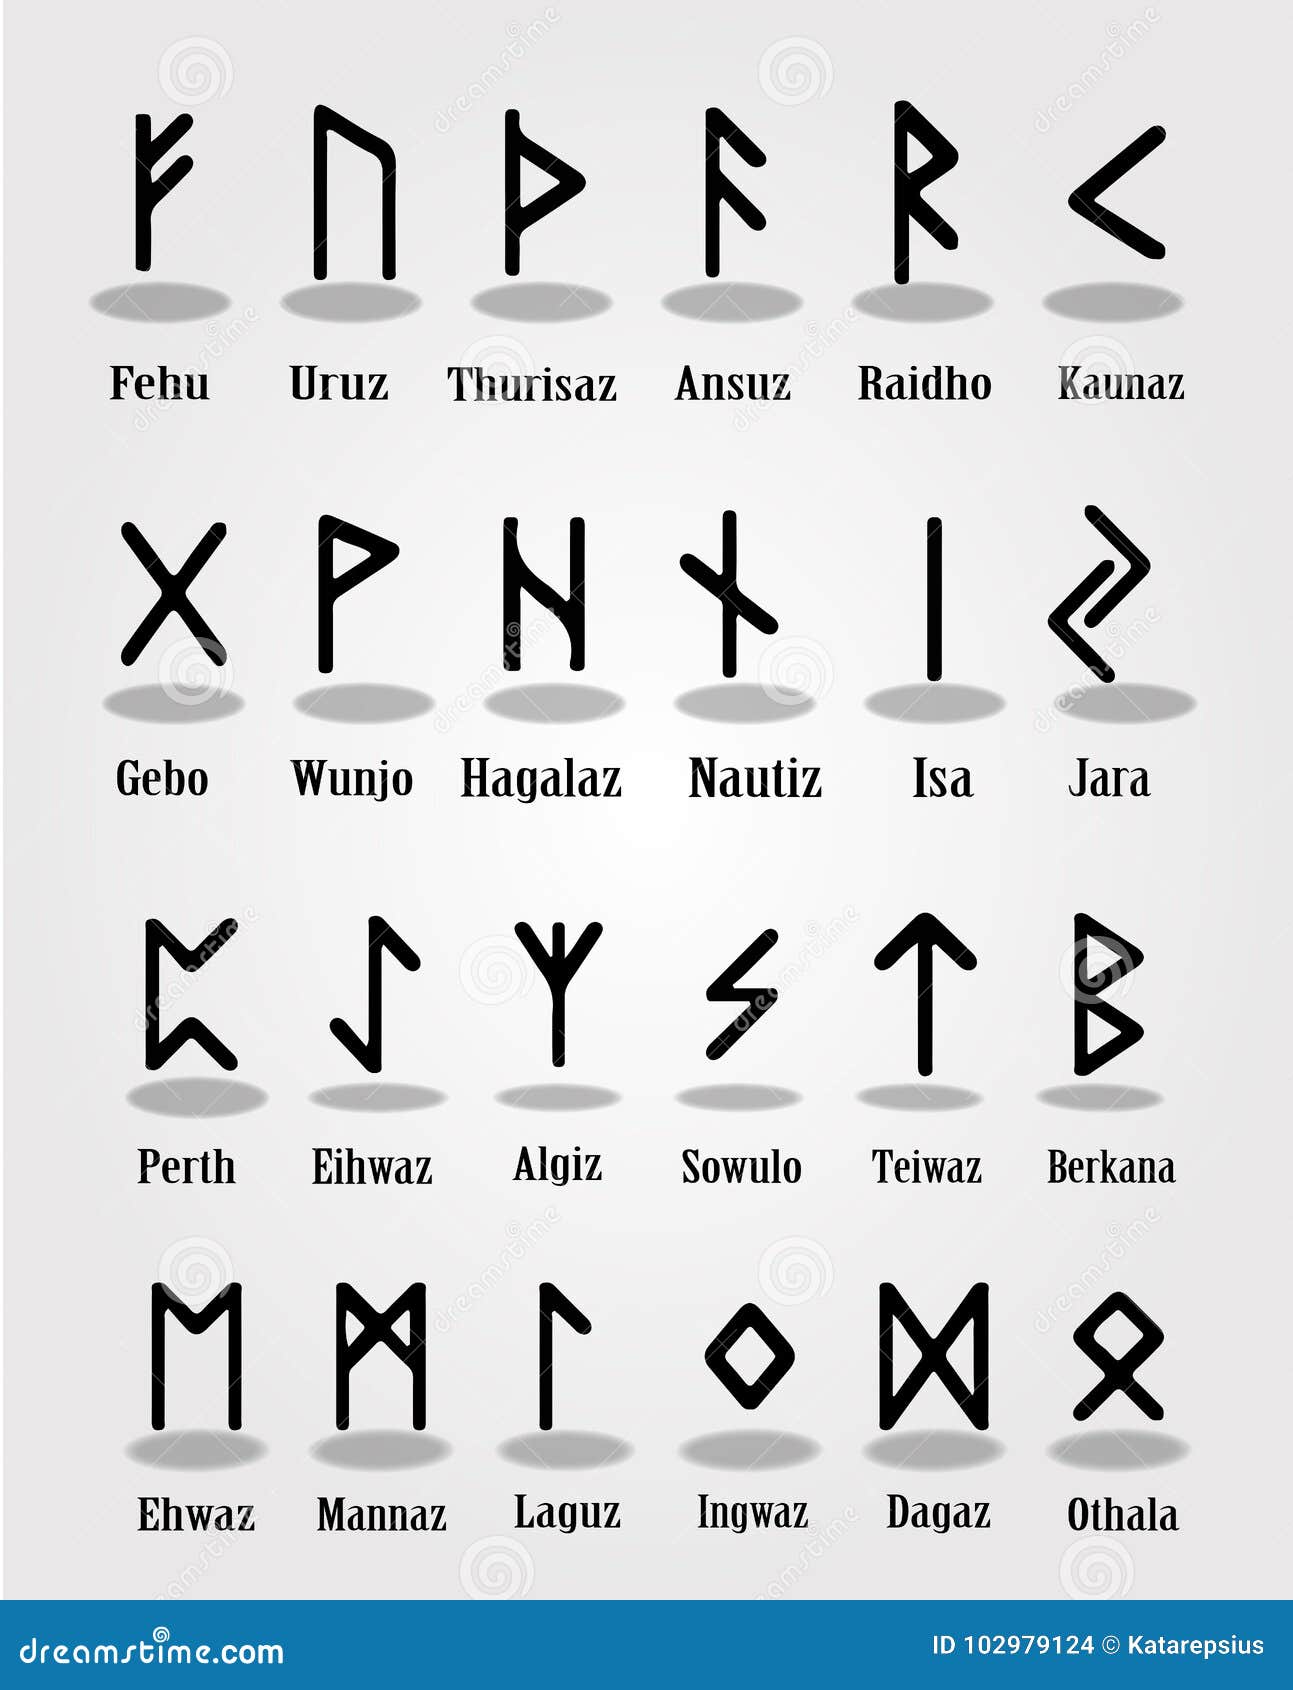 Ancient Rune Alphabet with Names of Runes and Transliteration To